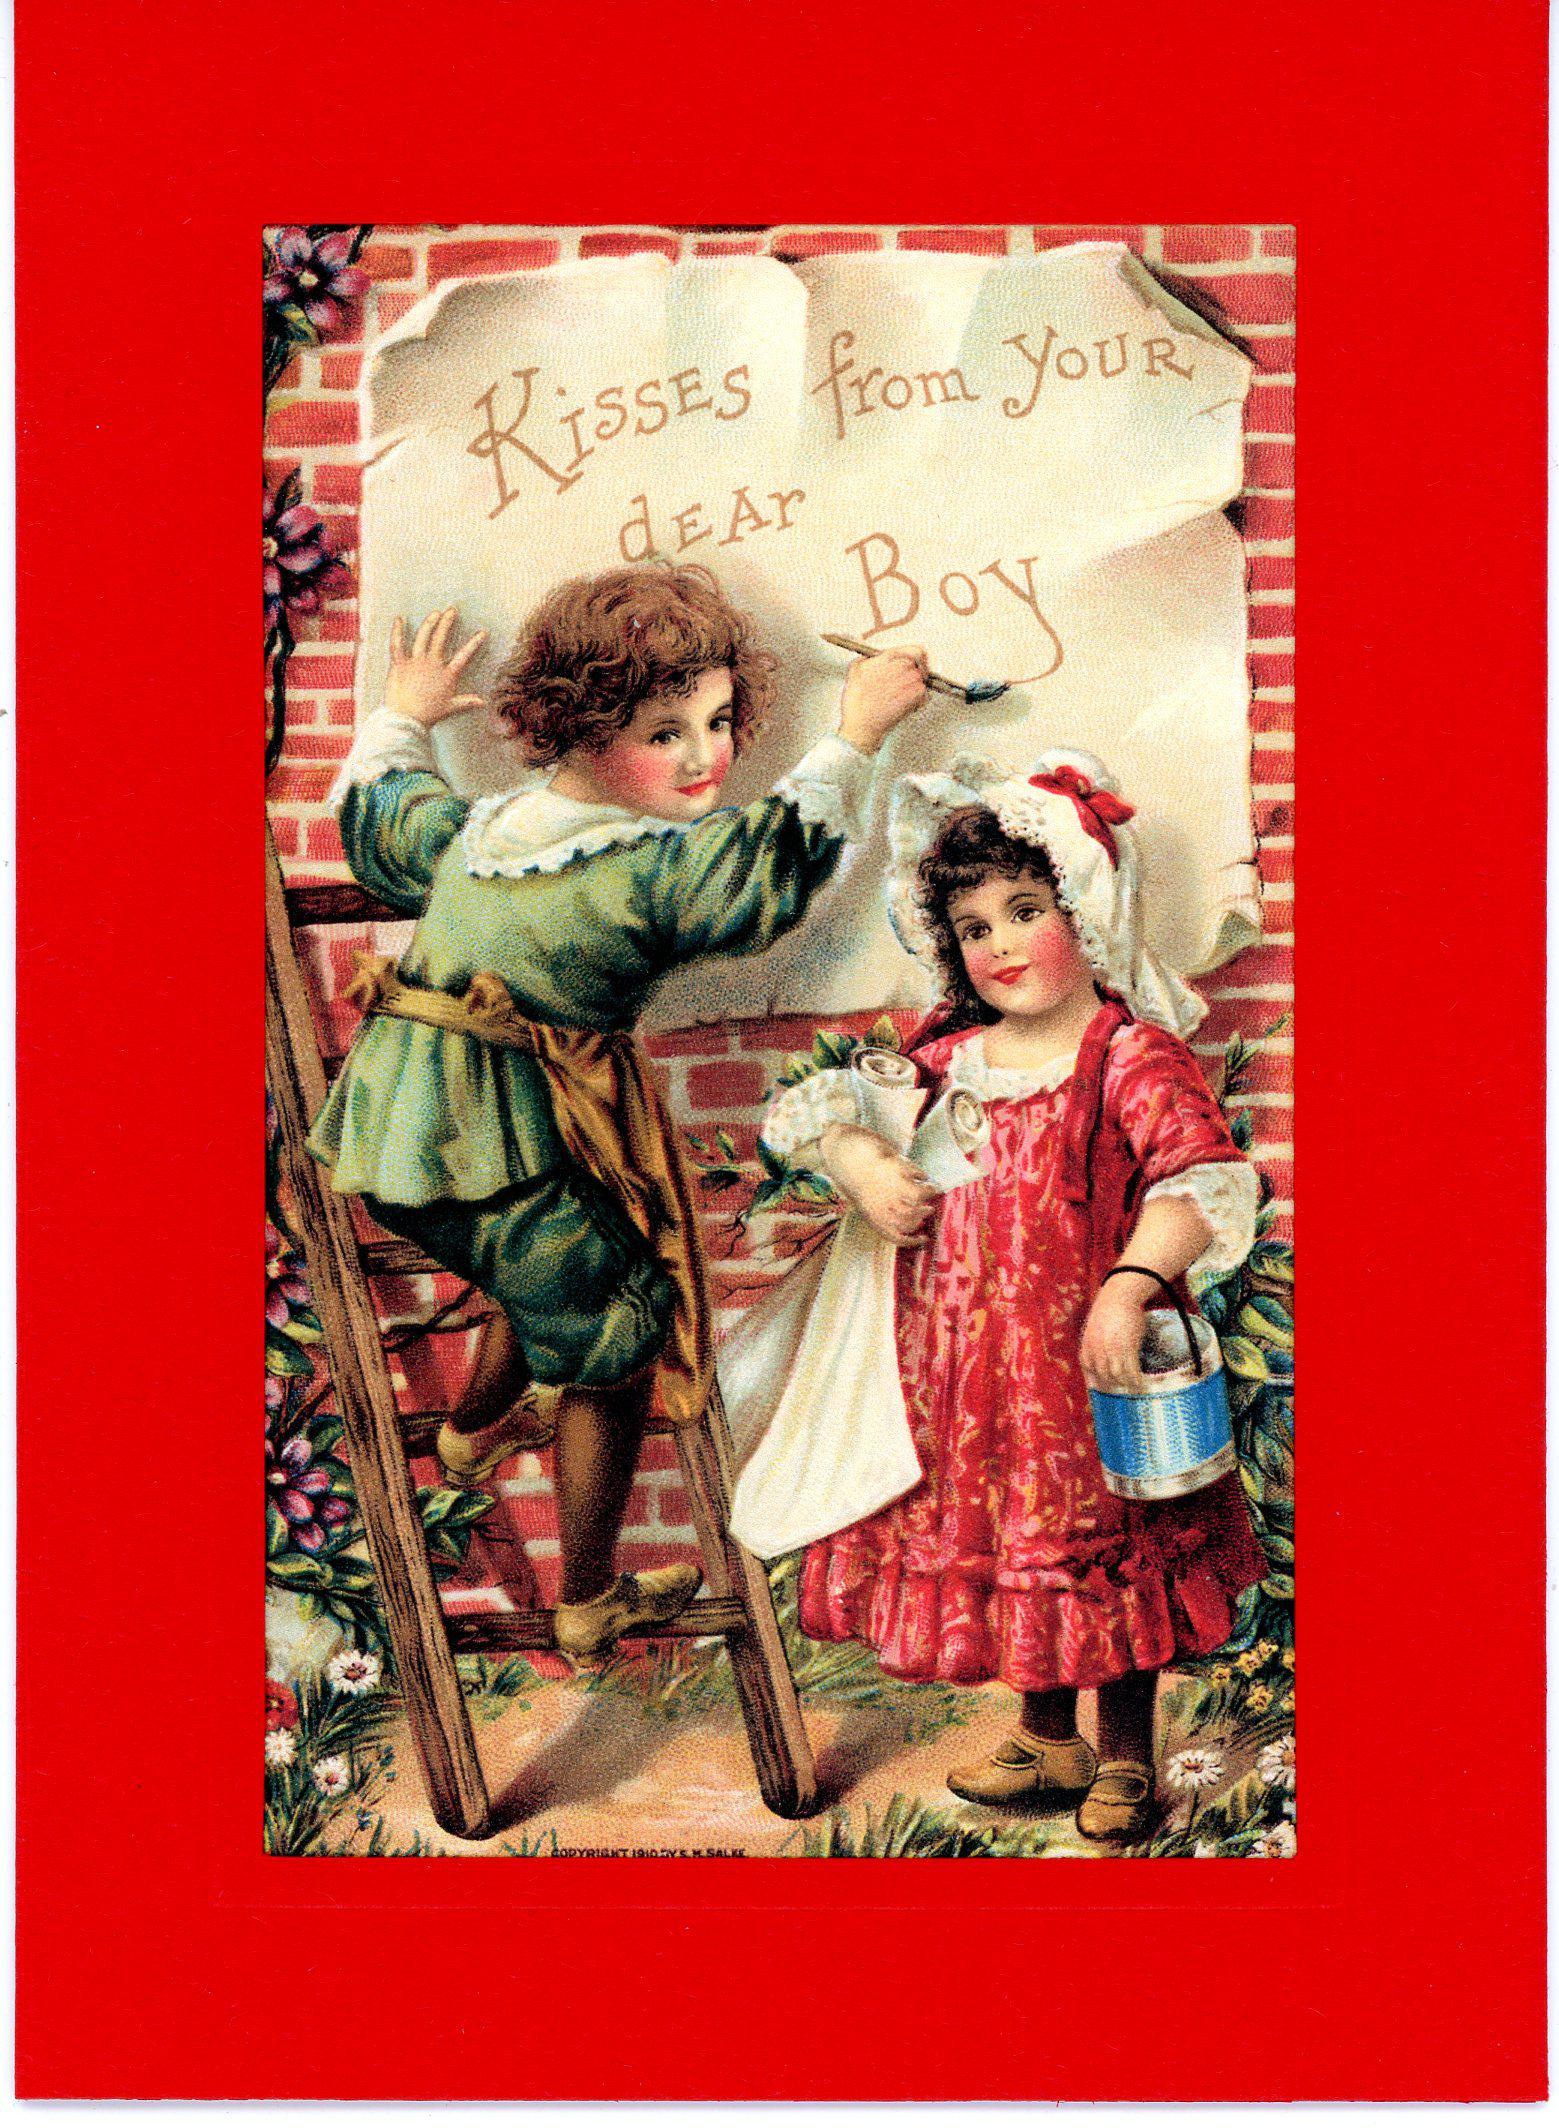 Kisses from Your Dear Boy-Greetings from the Past-Plymouth Cards